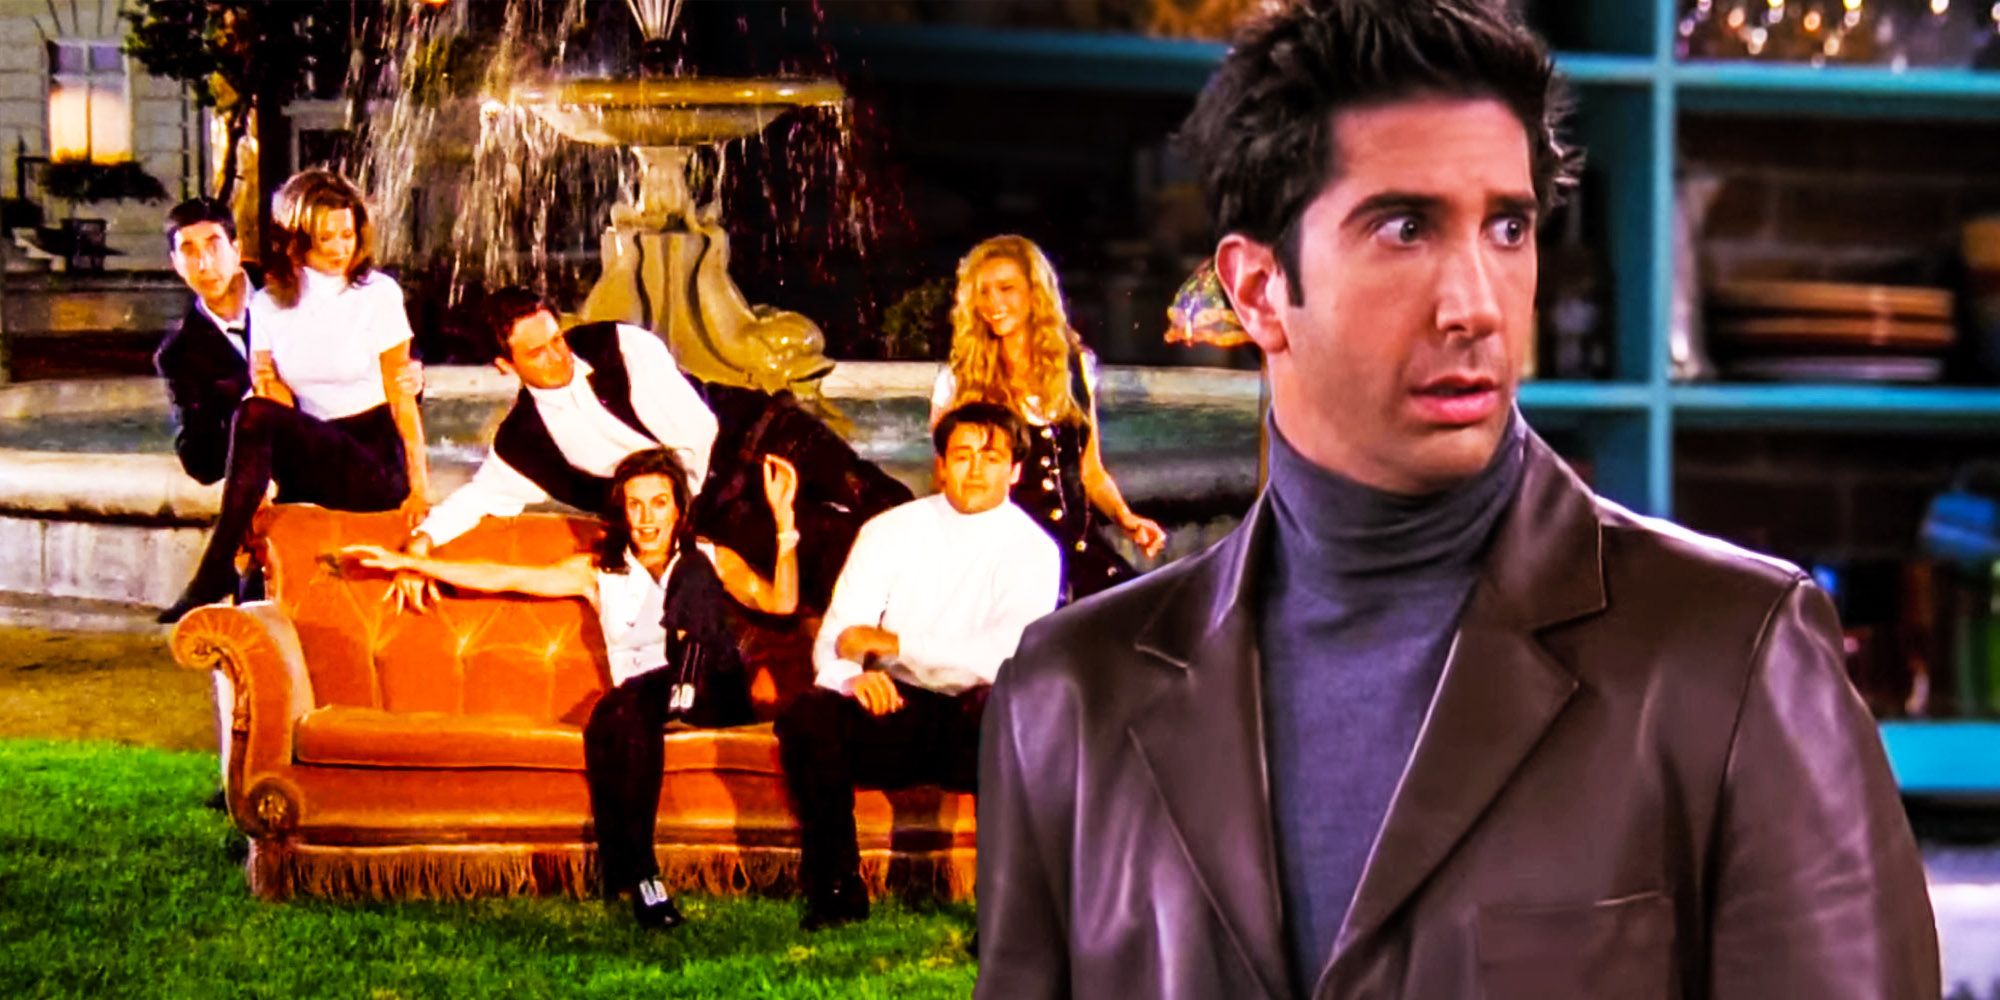 Friends Ross Shocked cast in opening couch fountain